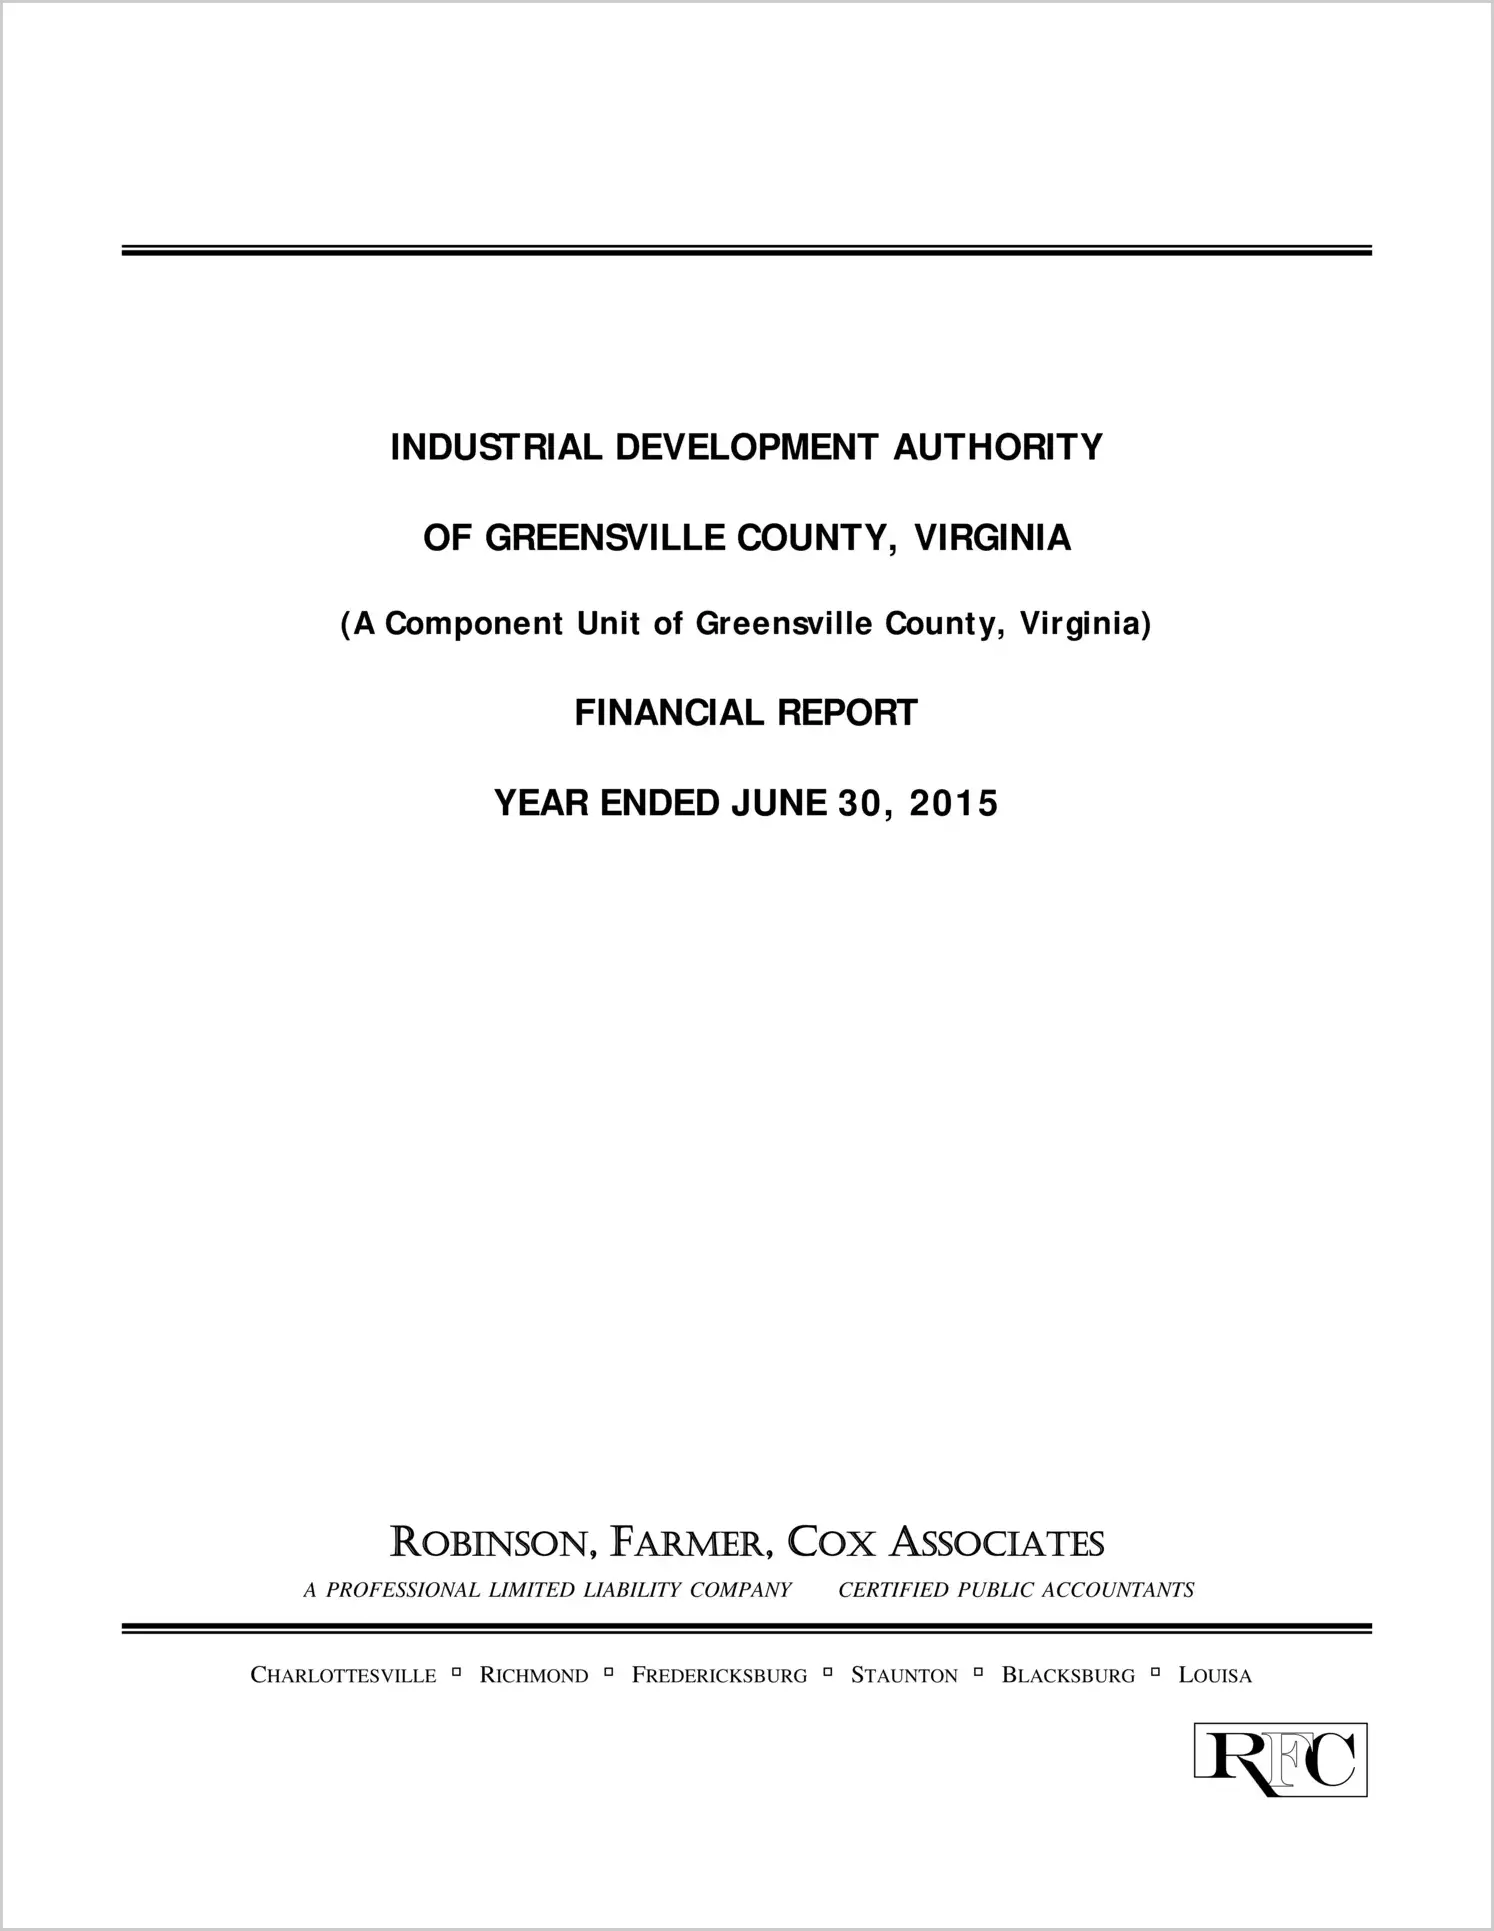 2015 ABC/Other Annual Financial Report  for Greensville Industrial Development Authority